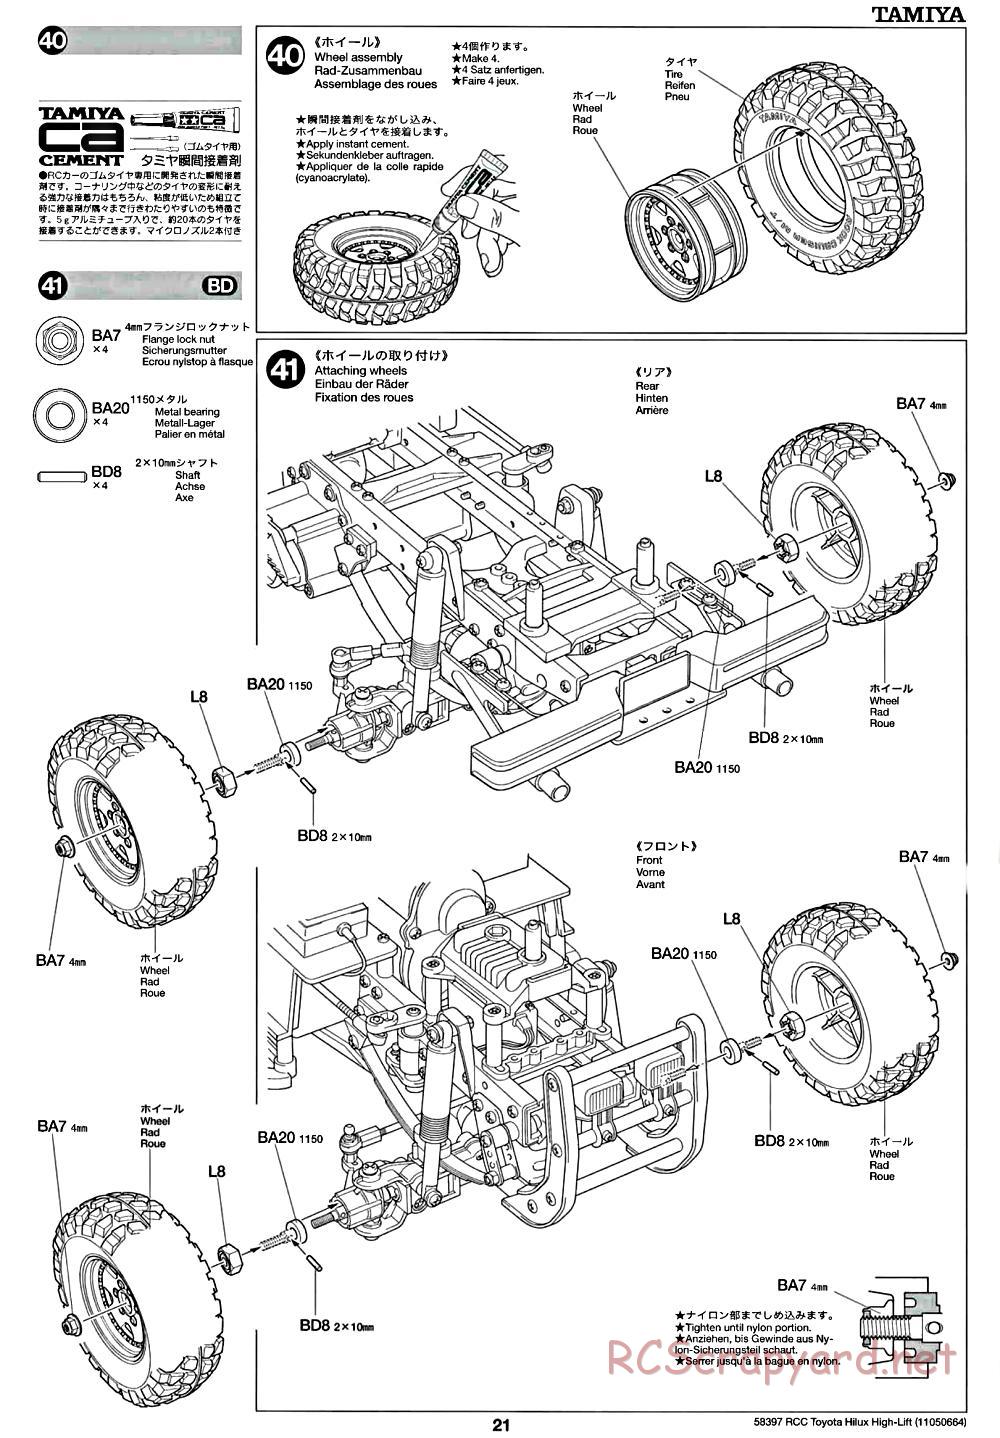 Tamiya - Toyota Hilux High-Lift Chassis - Manual - Page 21